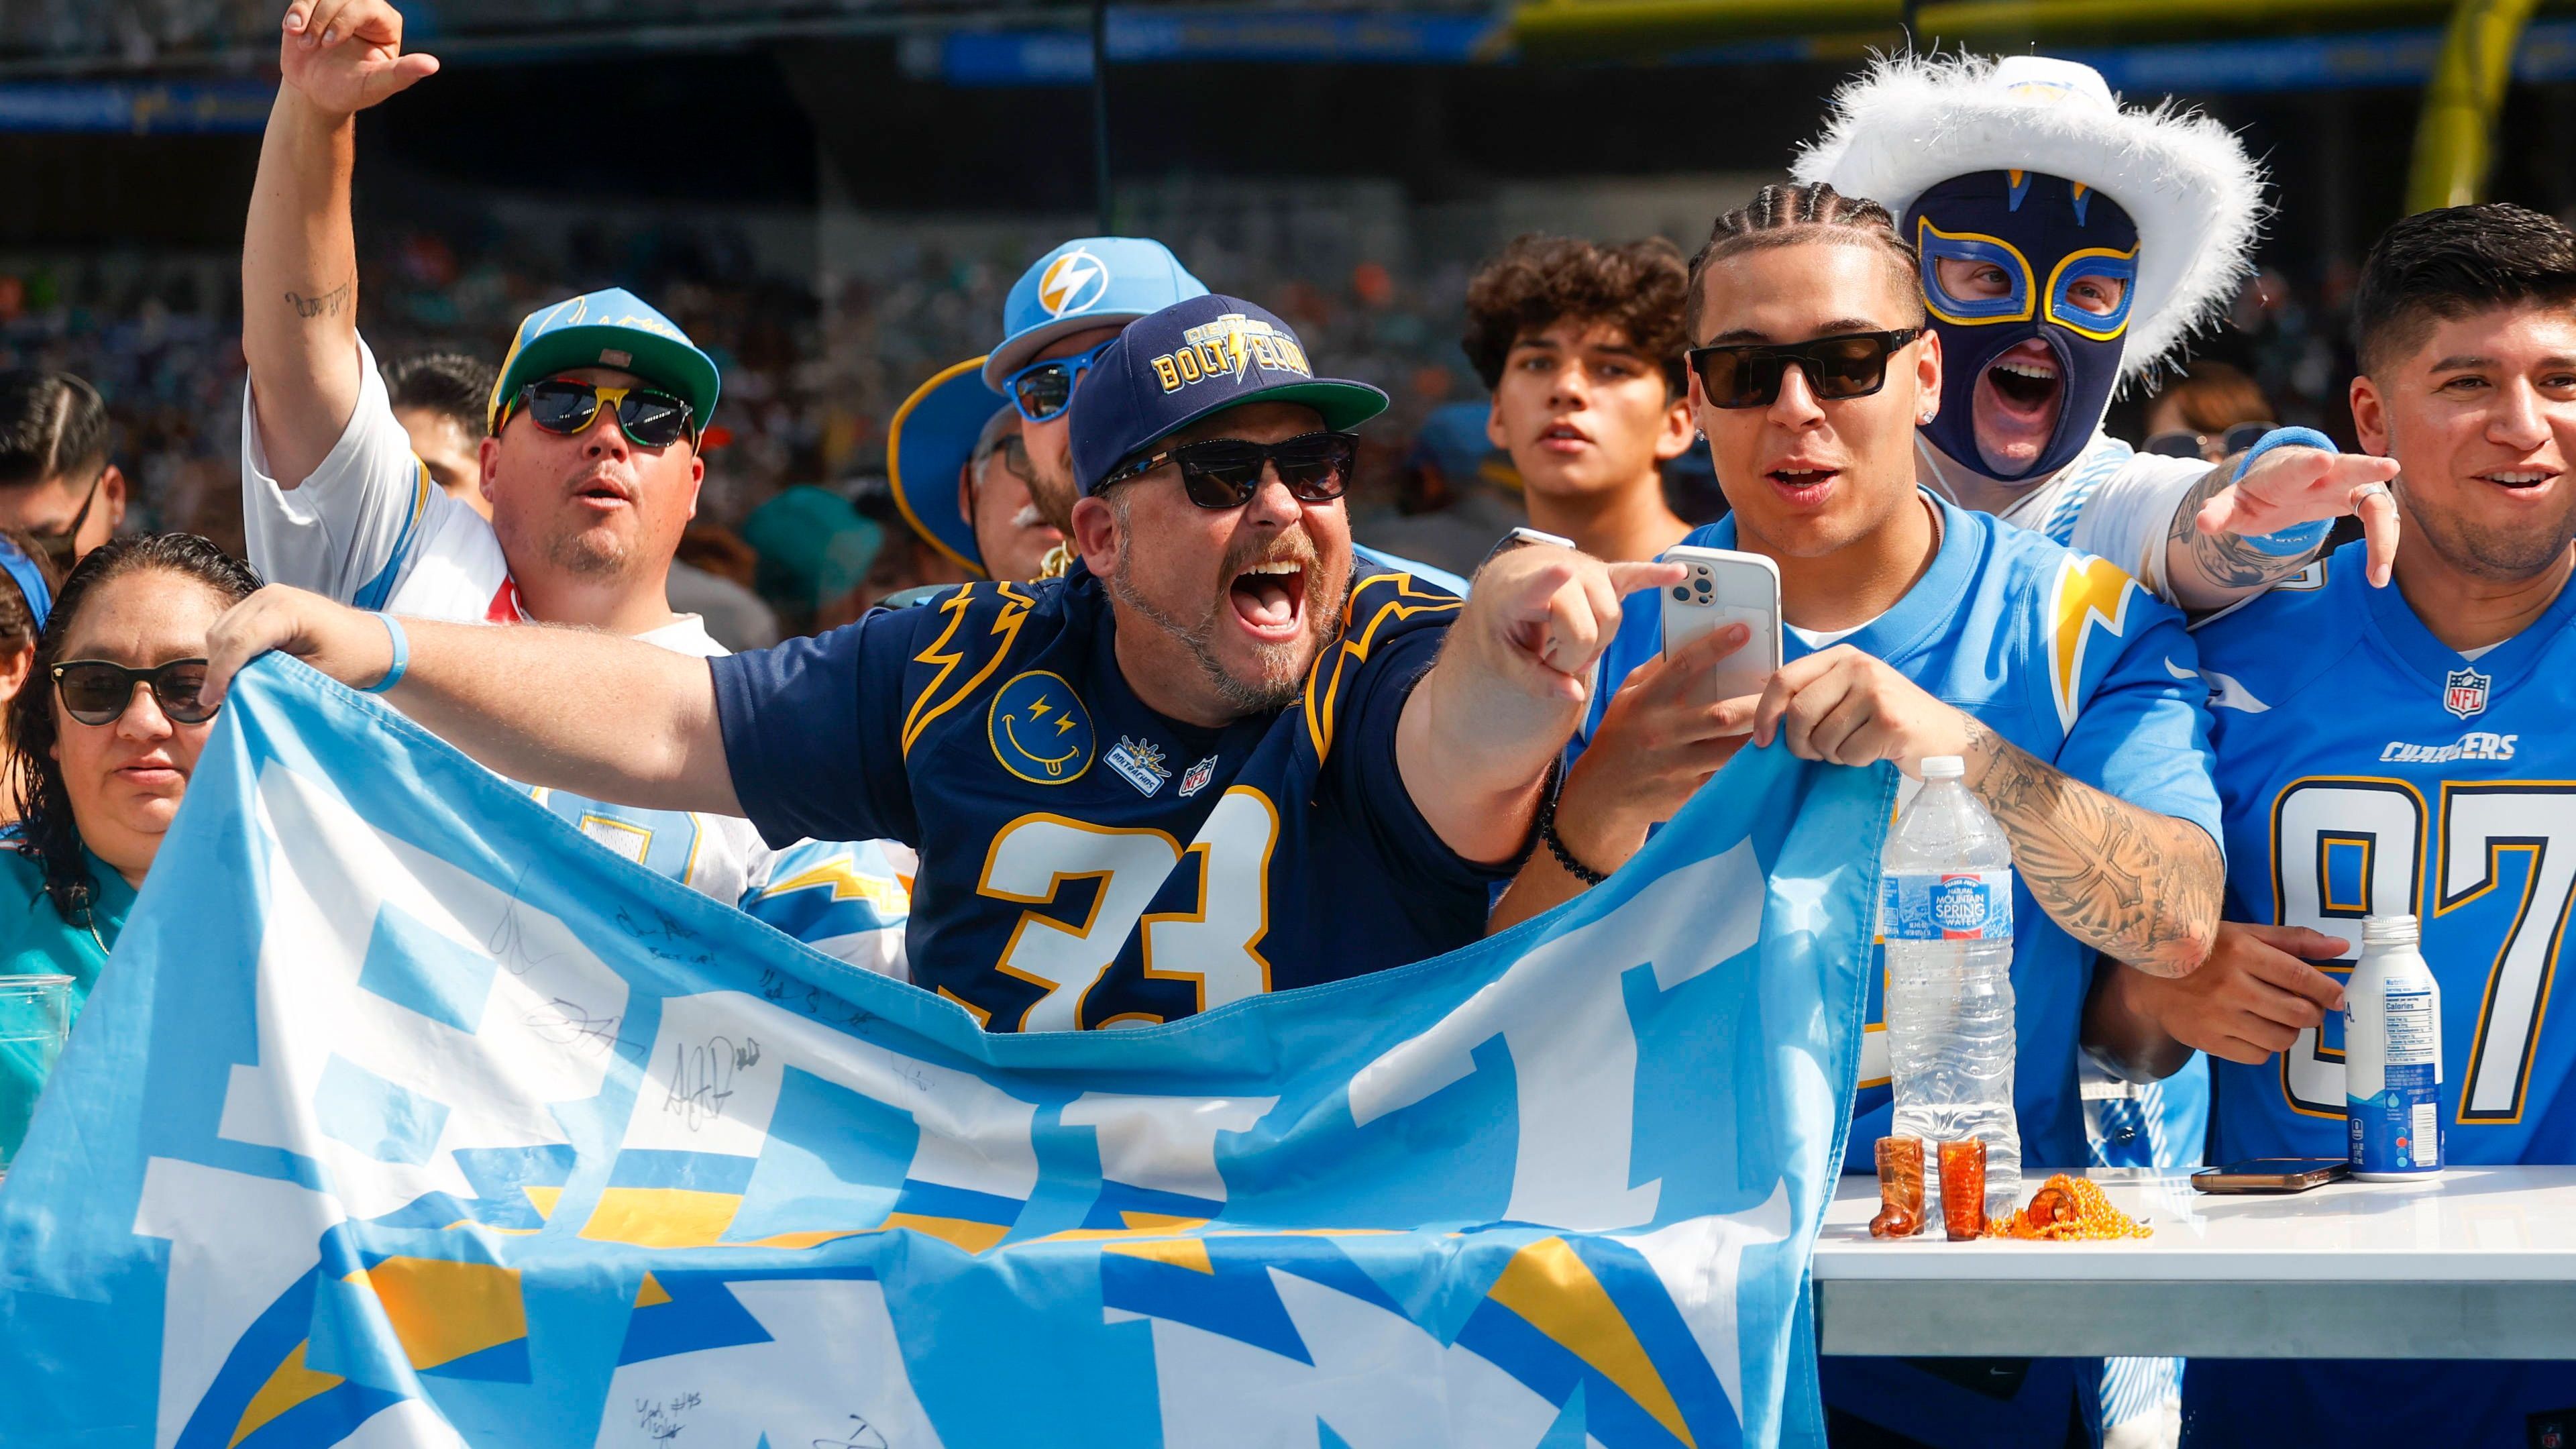 <strong>Platz 26: Los Angeles Chargers</strong><br>0,62 Promille